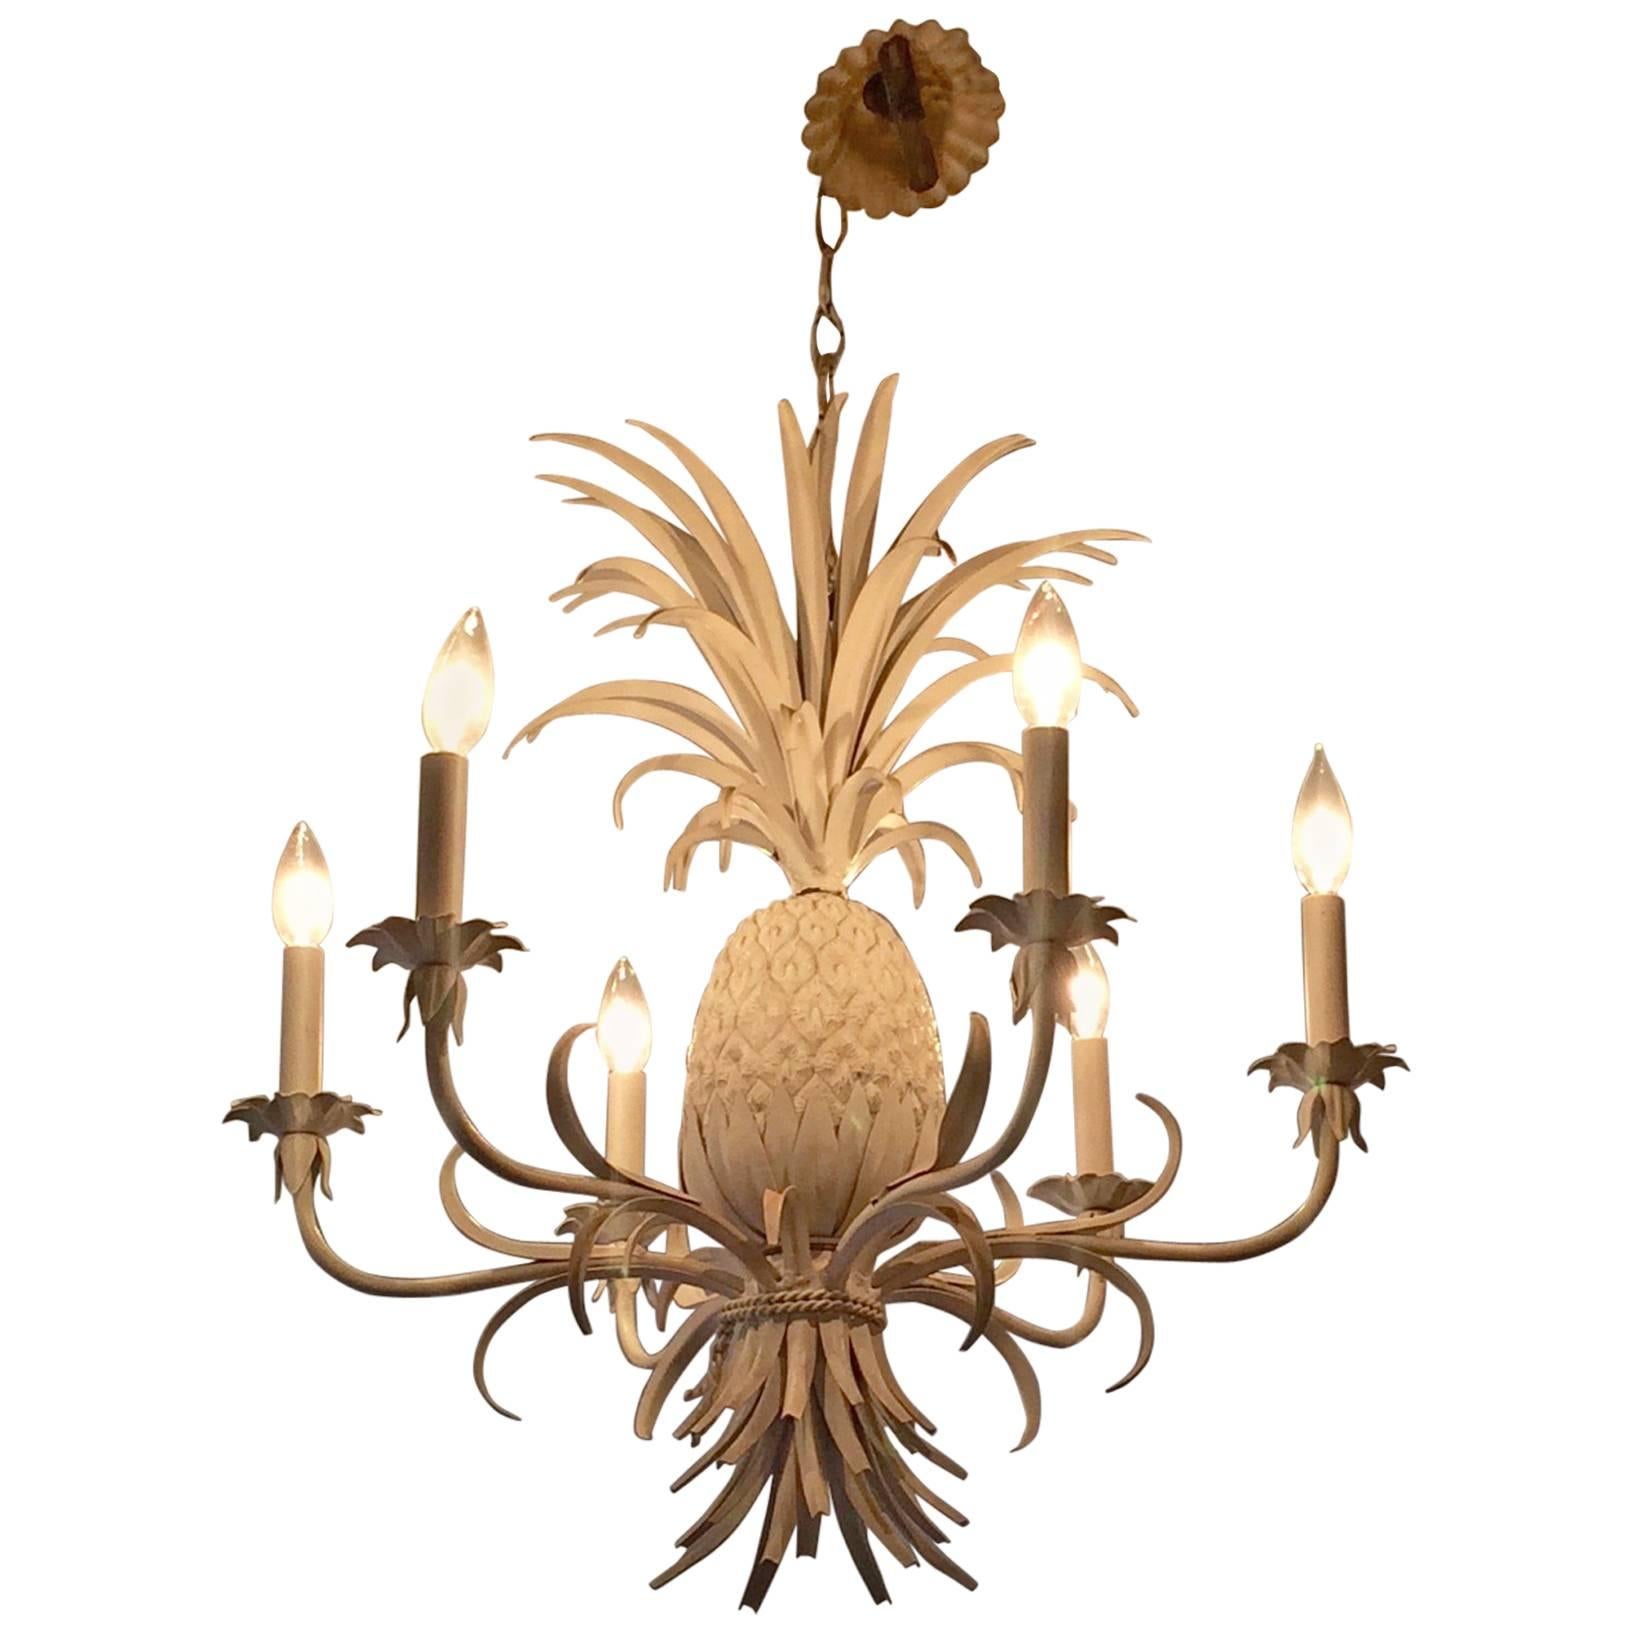 Glamorous White Painted Tole and Iron Pineapple Chandelier